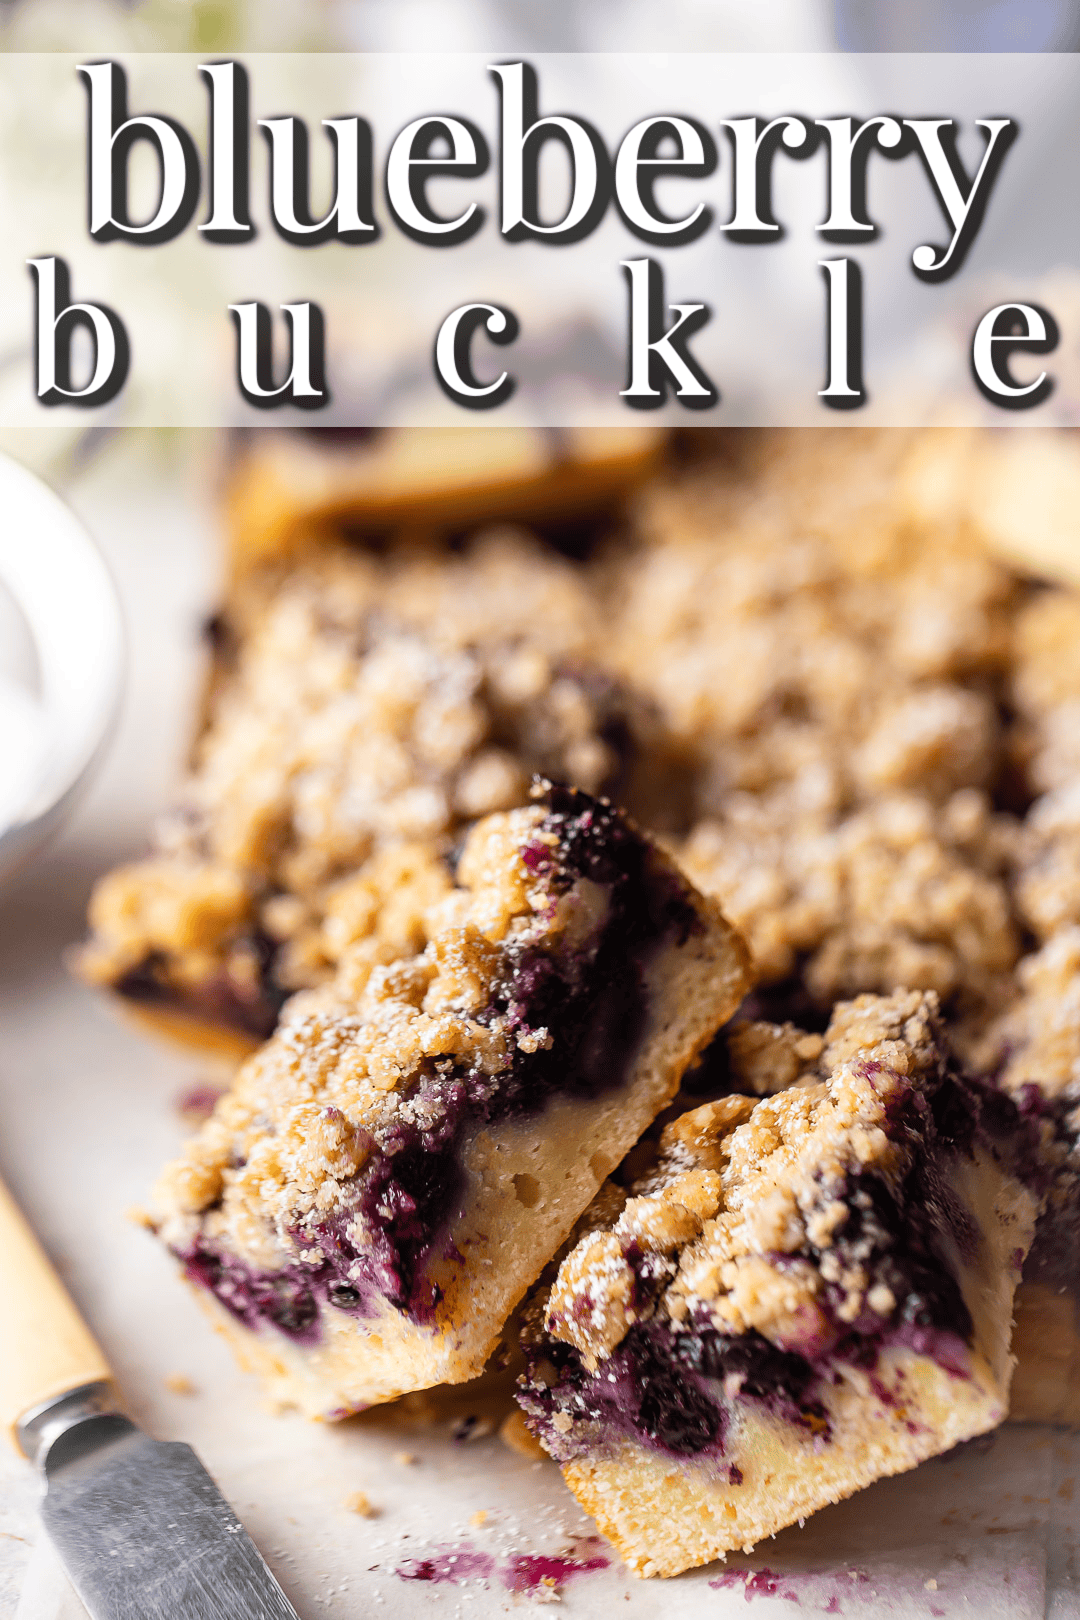 Squares of blueberry buckle in a pile with a text banner above that reads "Blueberry Buckle."